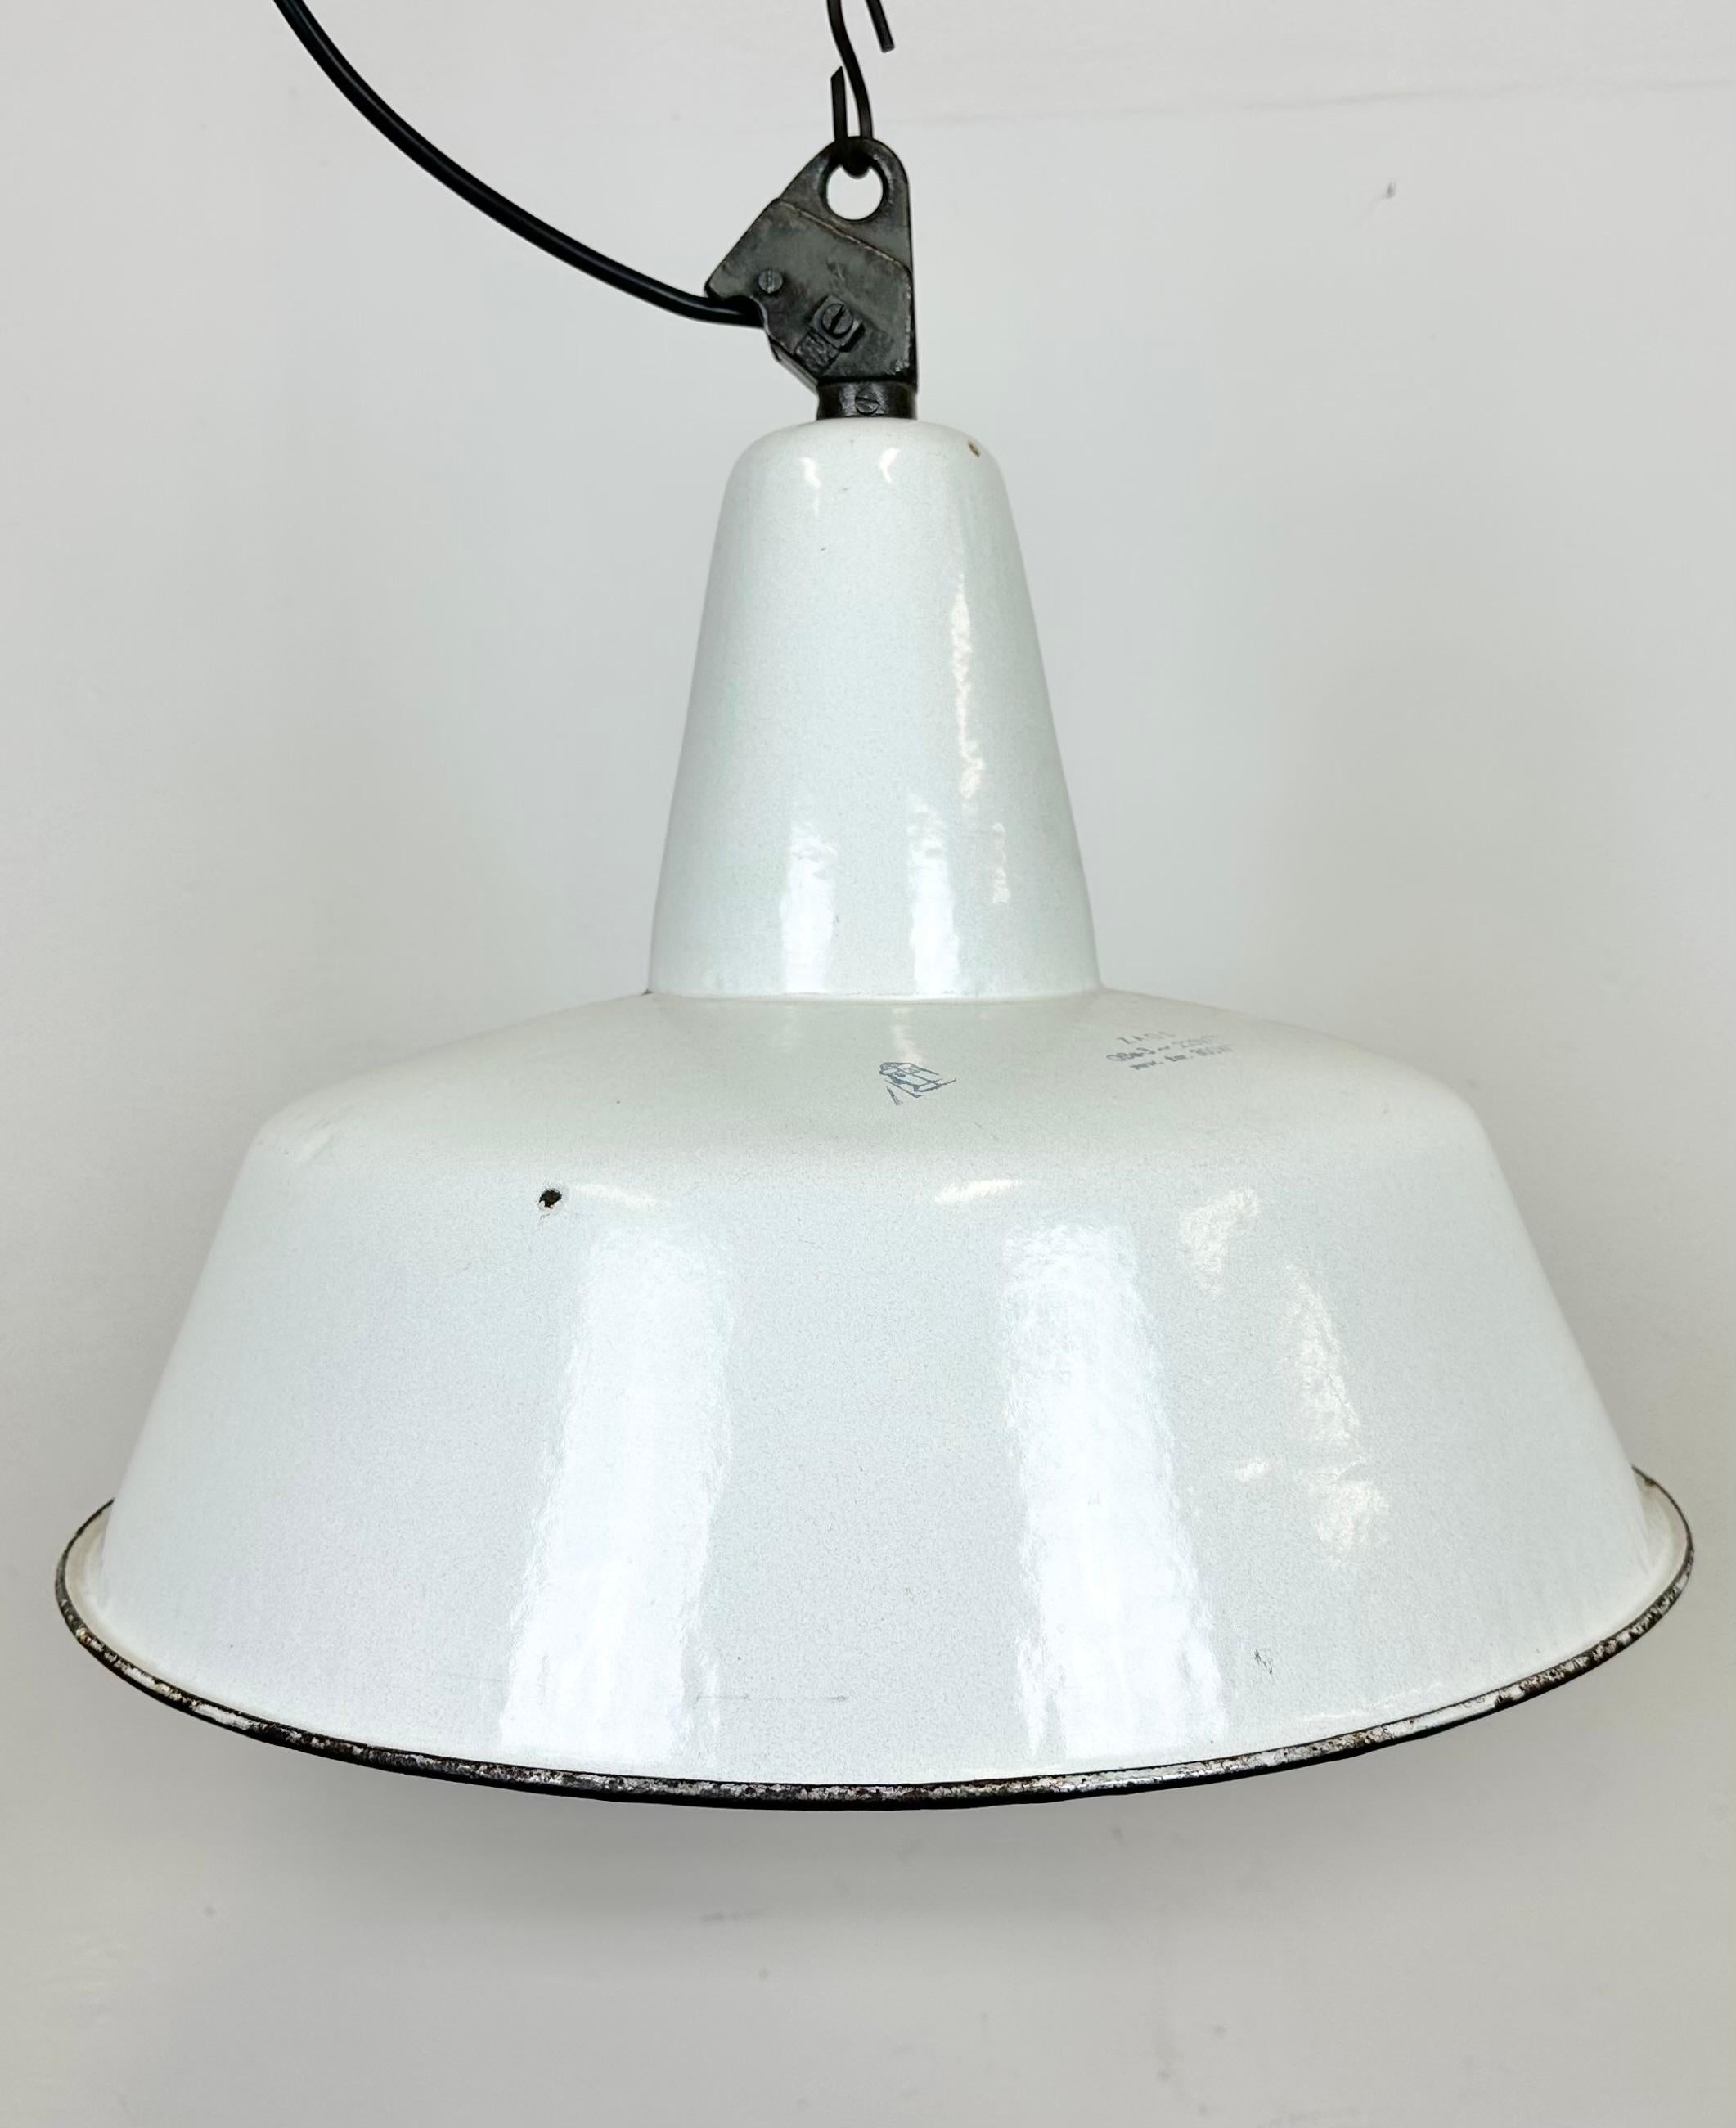 Polish Large Industrial White Enamel Factory Pendant Lamp from Zaos, 1960s For Sale